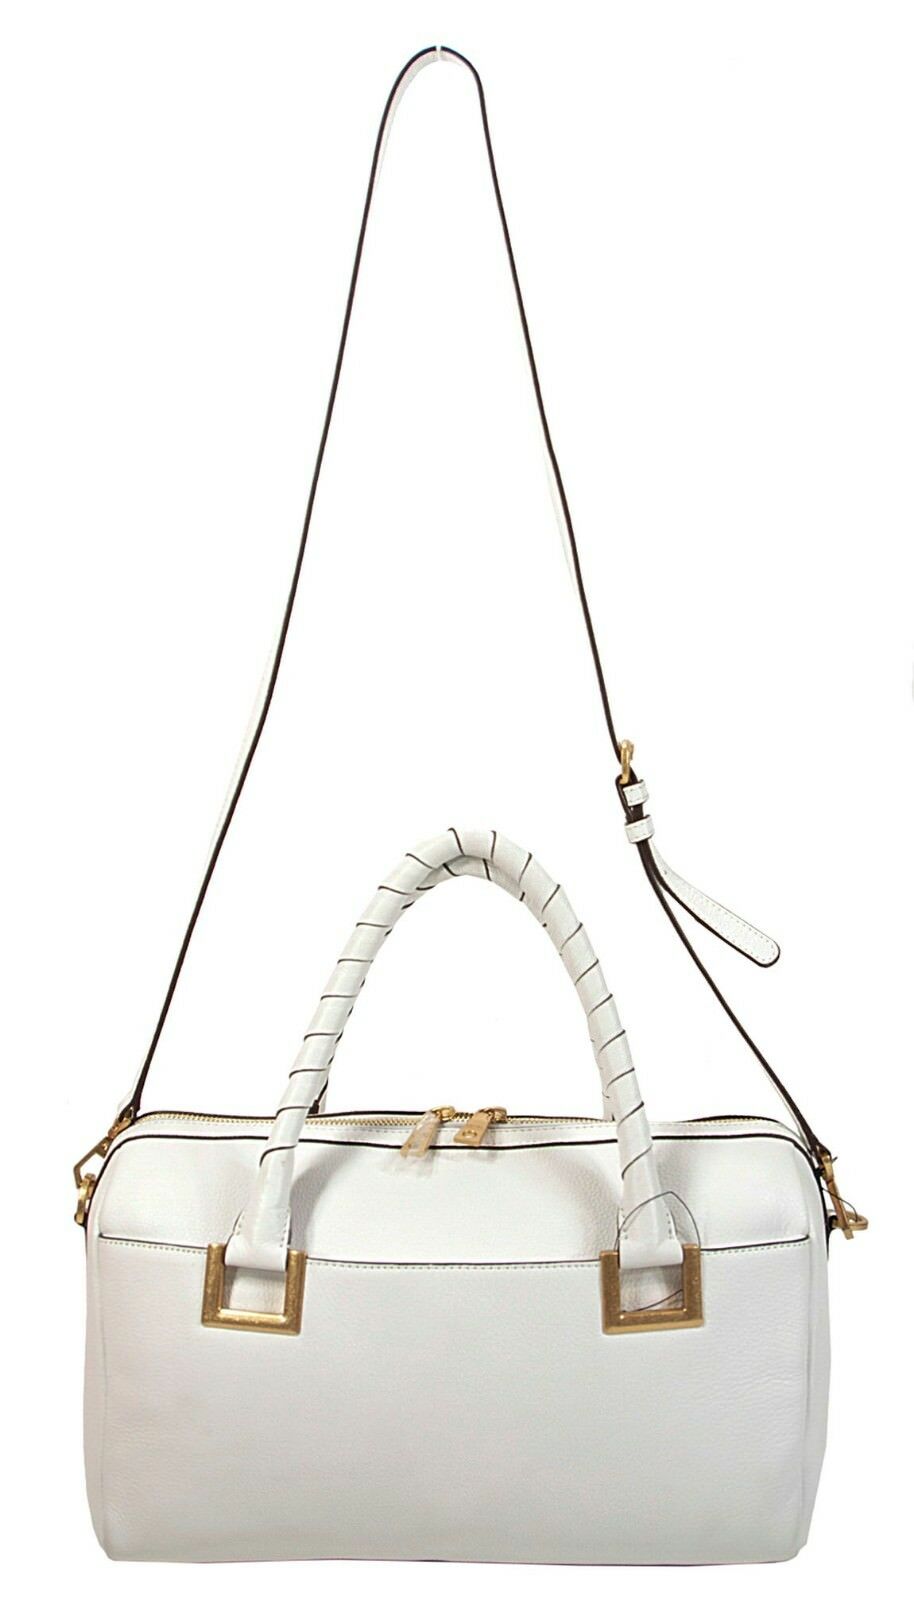 DKNY Crosby White Leather Satchel Large Gold Hardware with Rolled Handles NWT